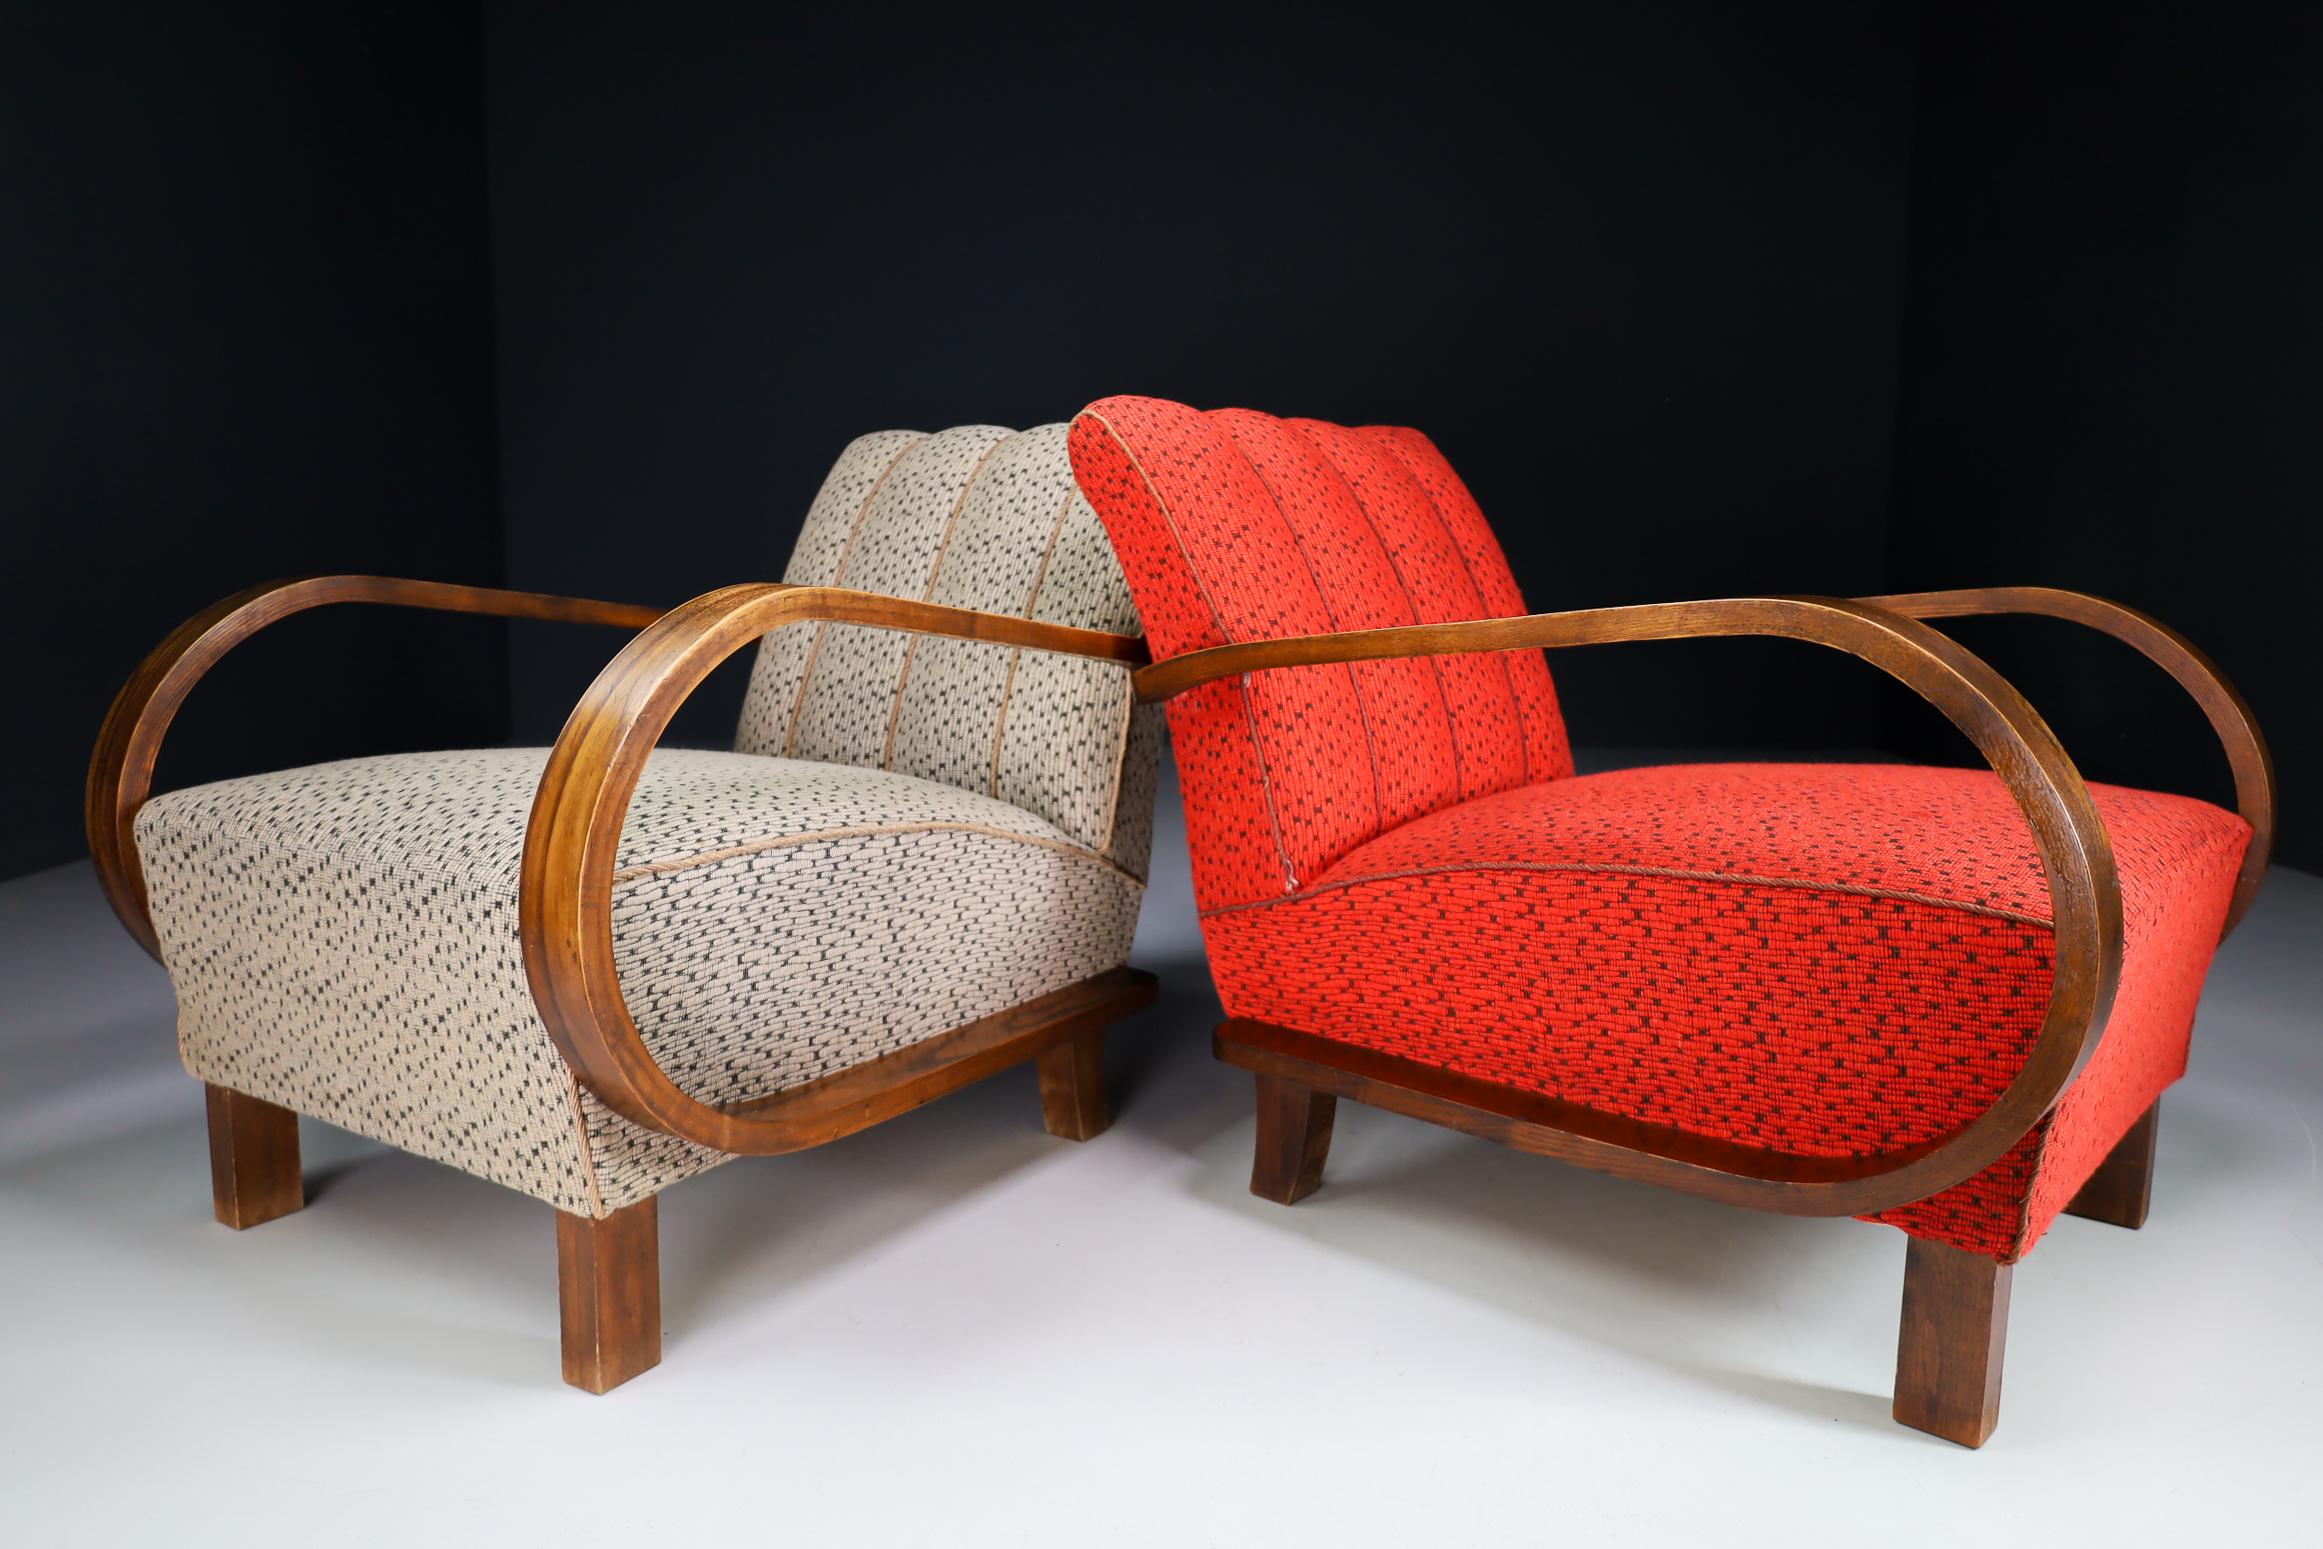 Pair of two original Art-Deco armchairs or lounge chairs manufactured and designed in Austria 1920s. Made of bentwood and with the original fabric. These armchairs would make an eye-catching addition to any interior such as living room, family room,